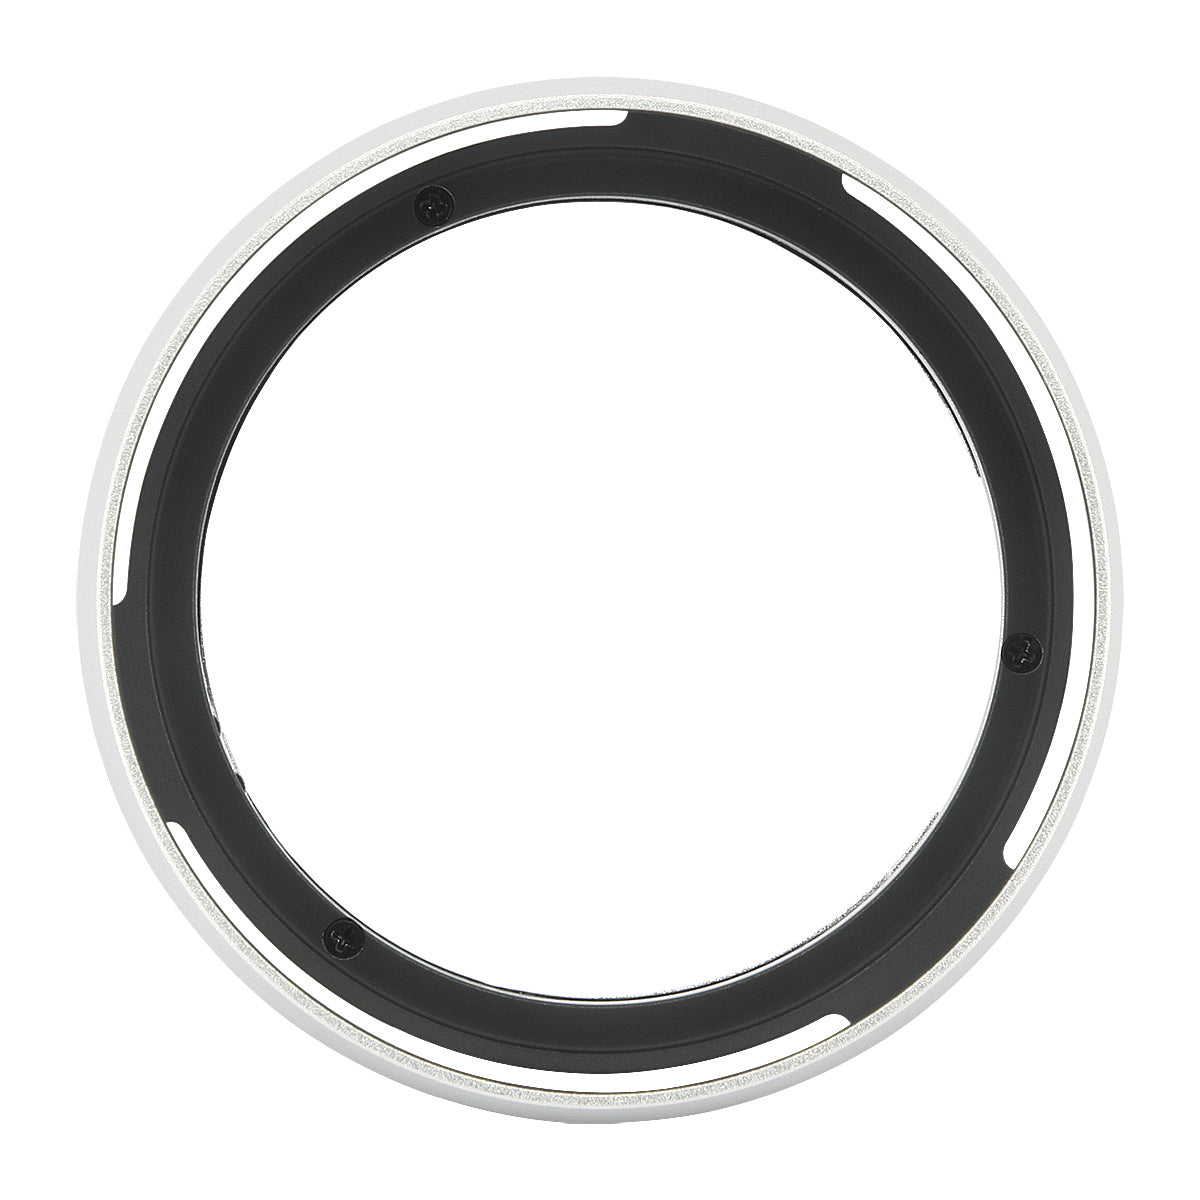 Haoge LH-ZM36 Bayonet Metal Round Lens Hood Shade Compatible with Carl Zeiss Distagon T 1.4/35 35mm f1.4 ZM Lens silver